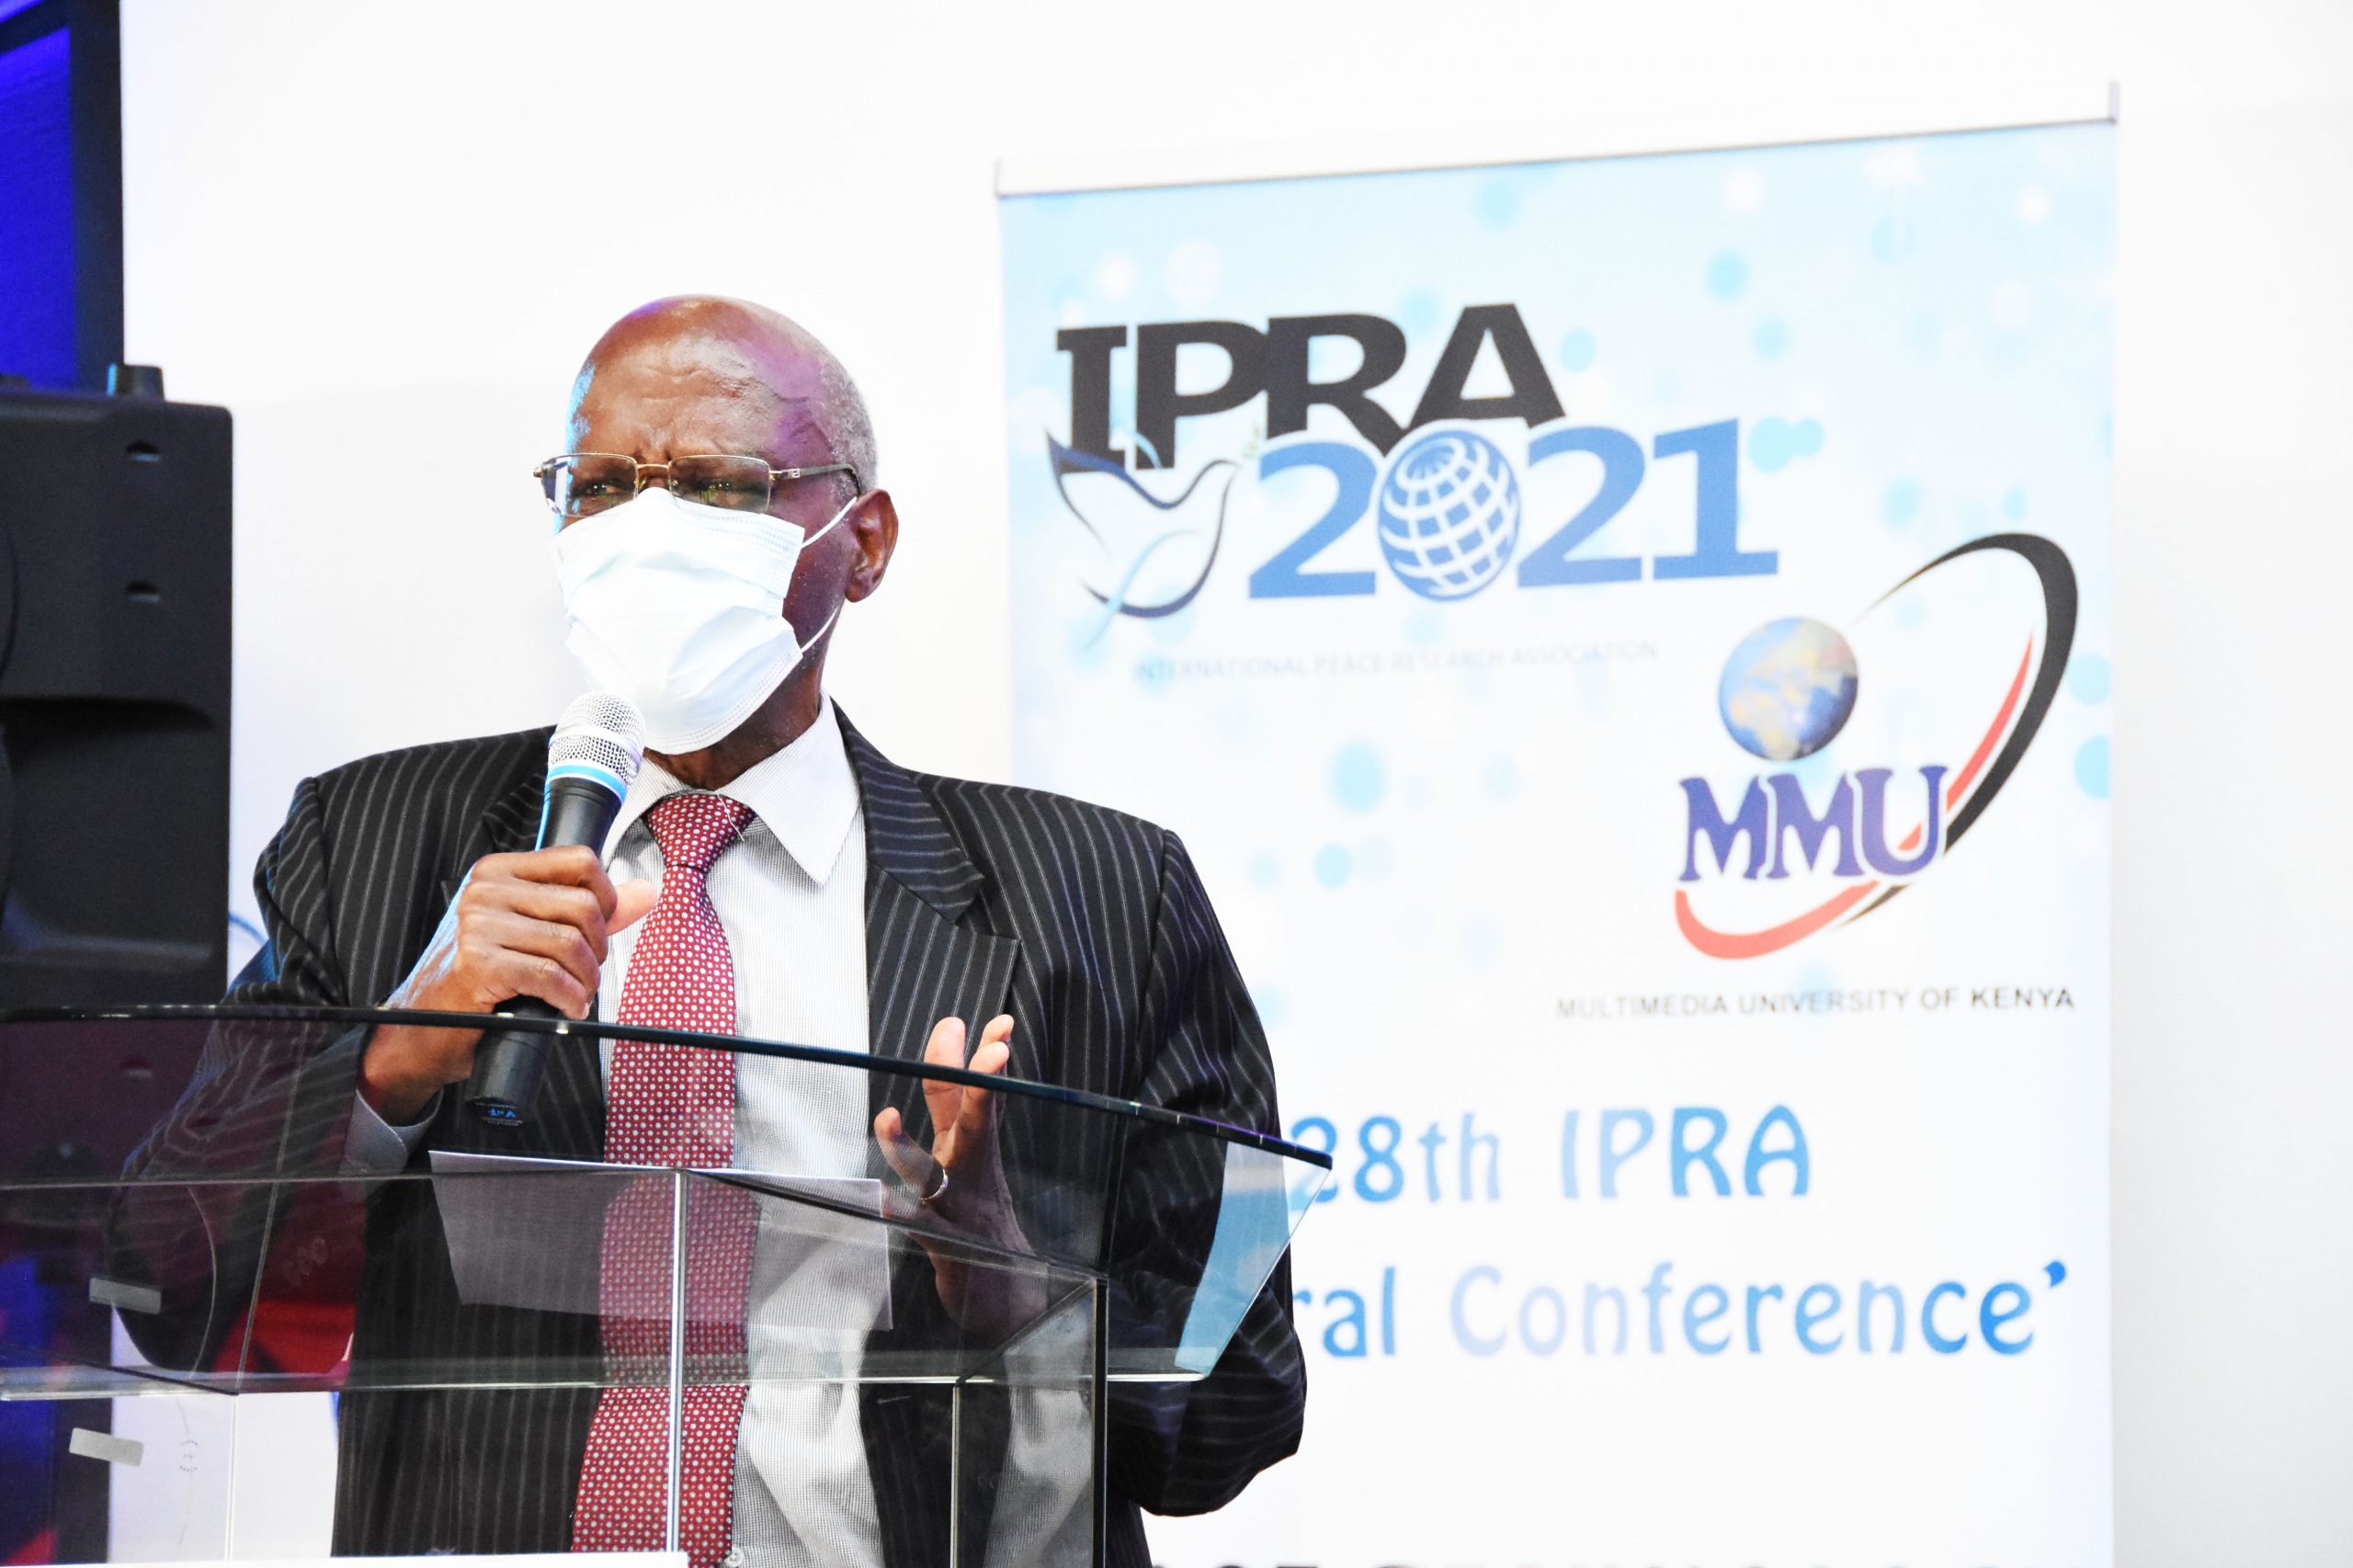 We must use technology to attain global peace goal – says Prof. Mbatia